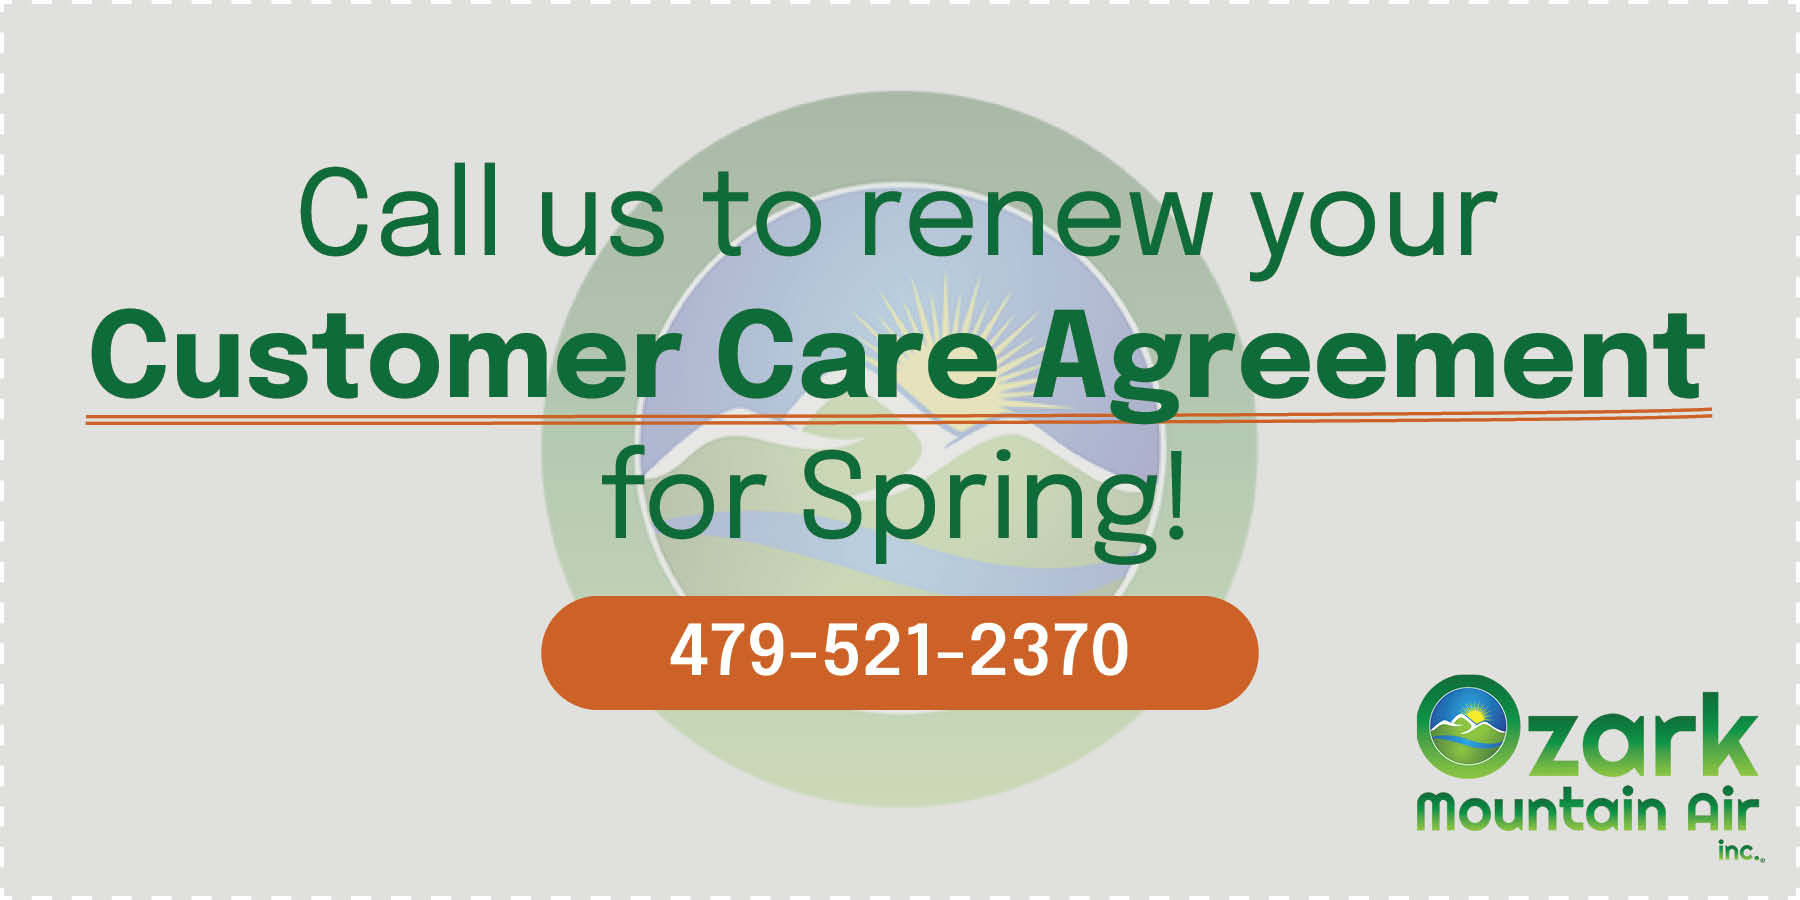 Call us to renew your Customer Care Agreement for Spring